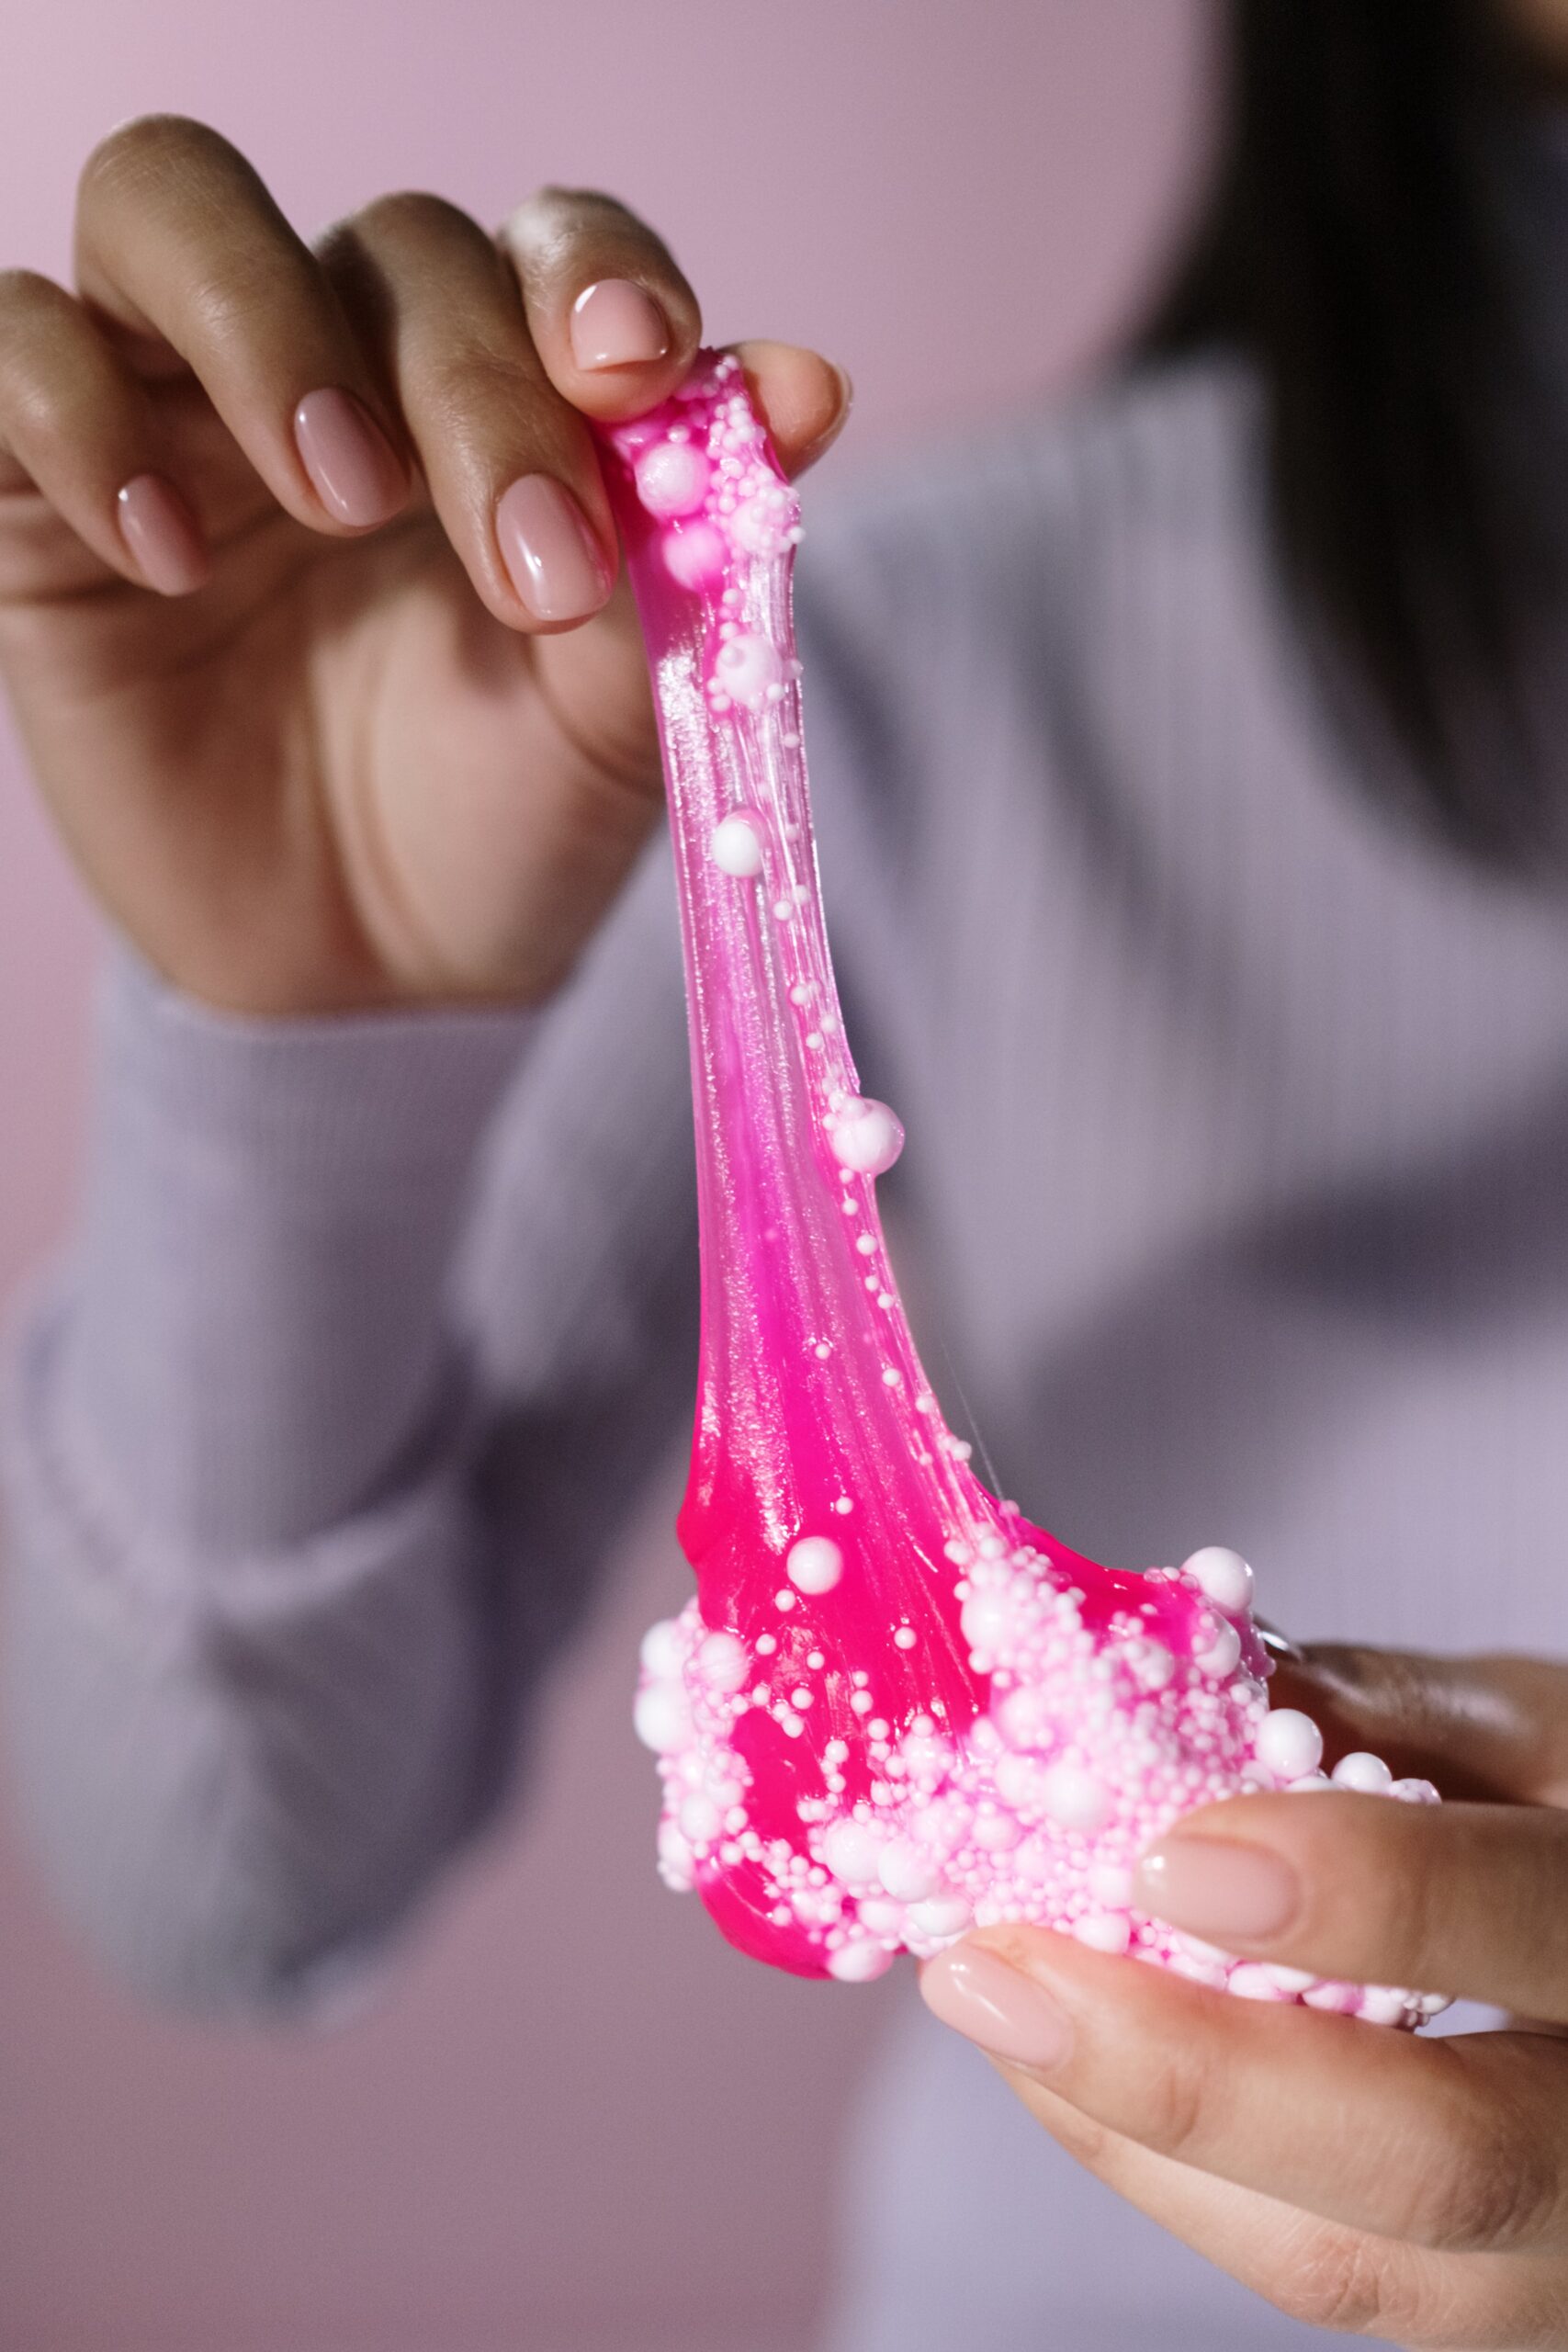 Fun Facts about Polymer Slime